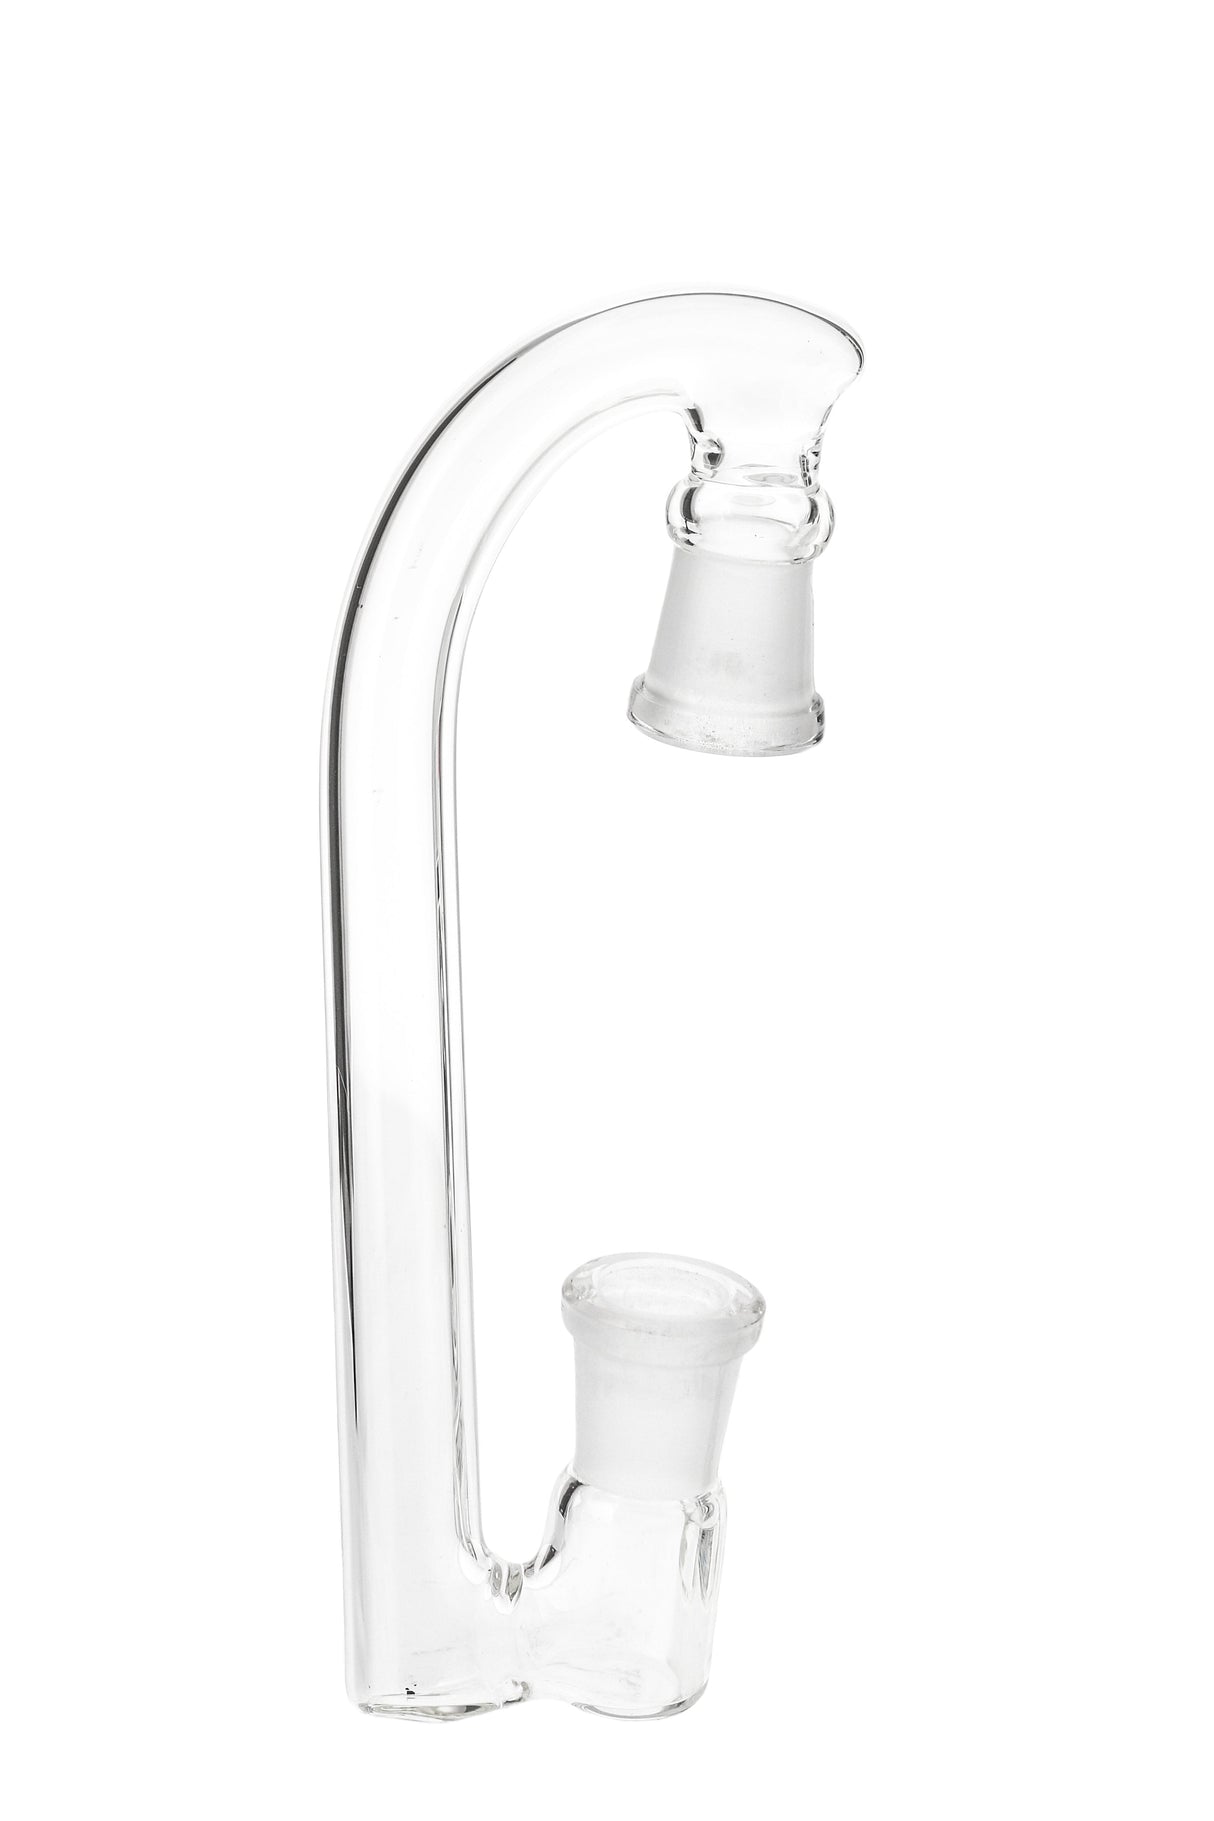 TAG Drop Down Adapter with a 3" drop, featuring male to female joint sizes 18mm to 14mm, made by Thick Ass Glass.